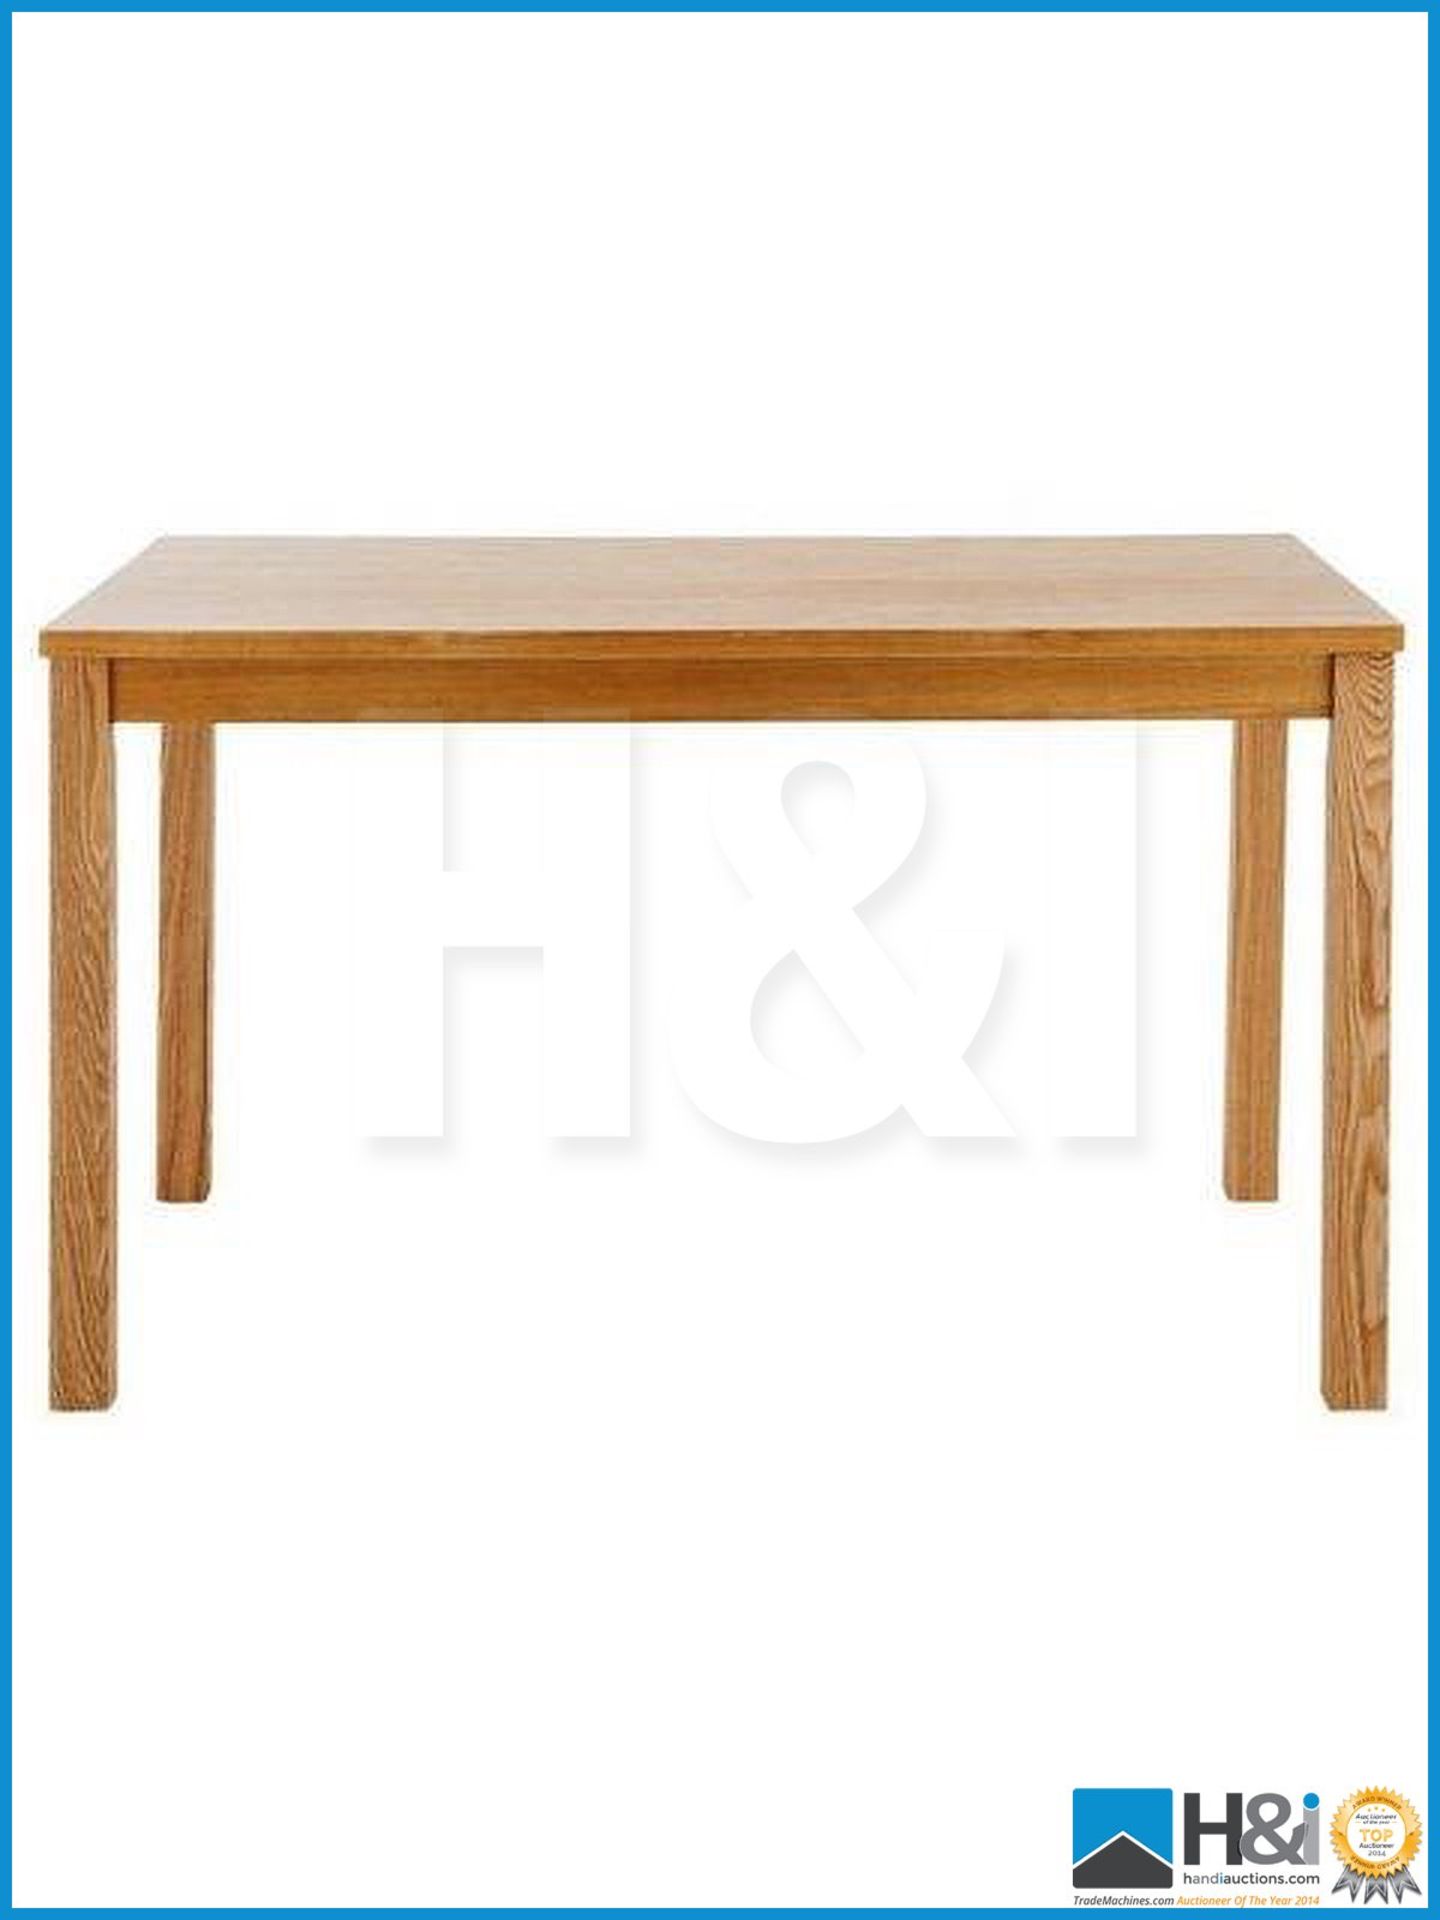 NEW IN BOX PRIMO DINING TABLE [OAK] 75 x 150 x 90cm RRP GBP 191